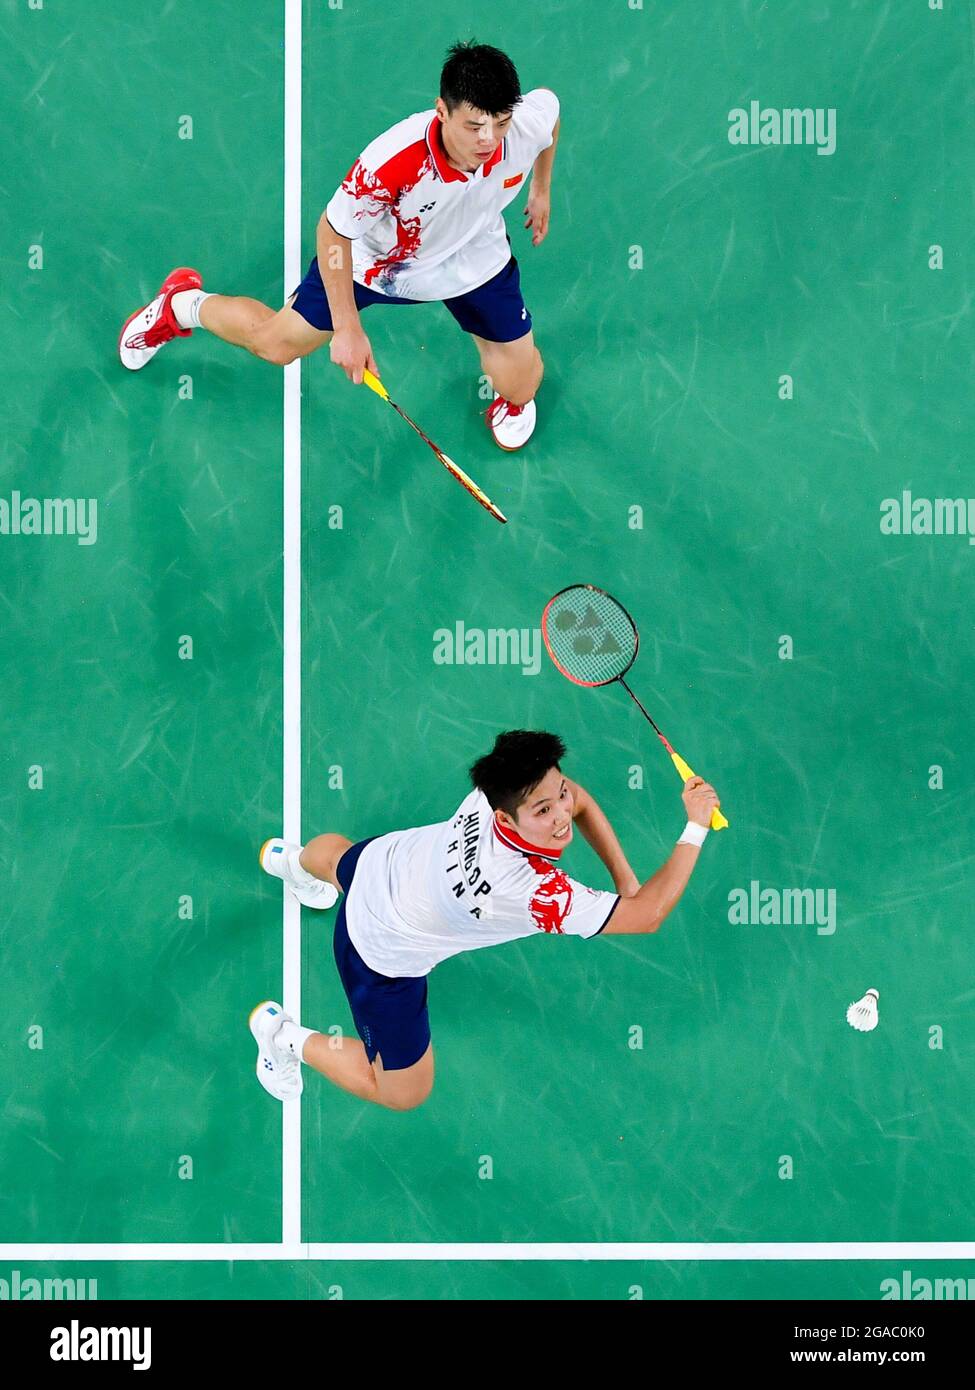 Huang games d.p. tokyo 2020 olympic Great shots